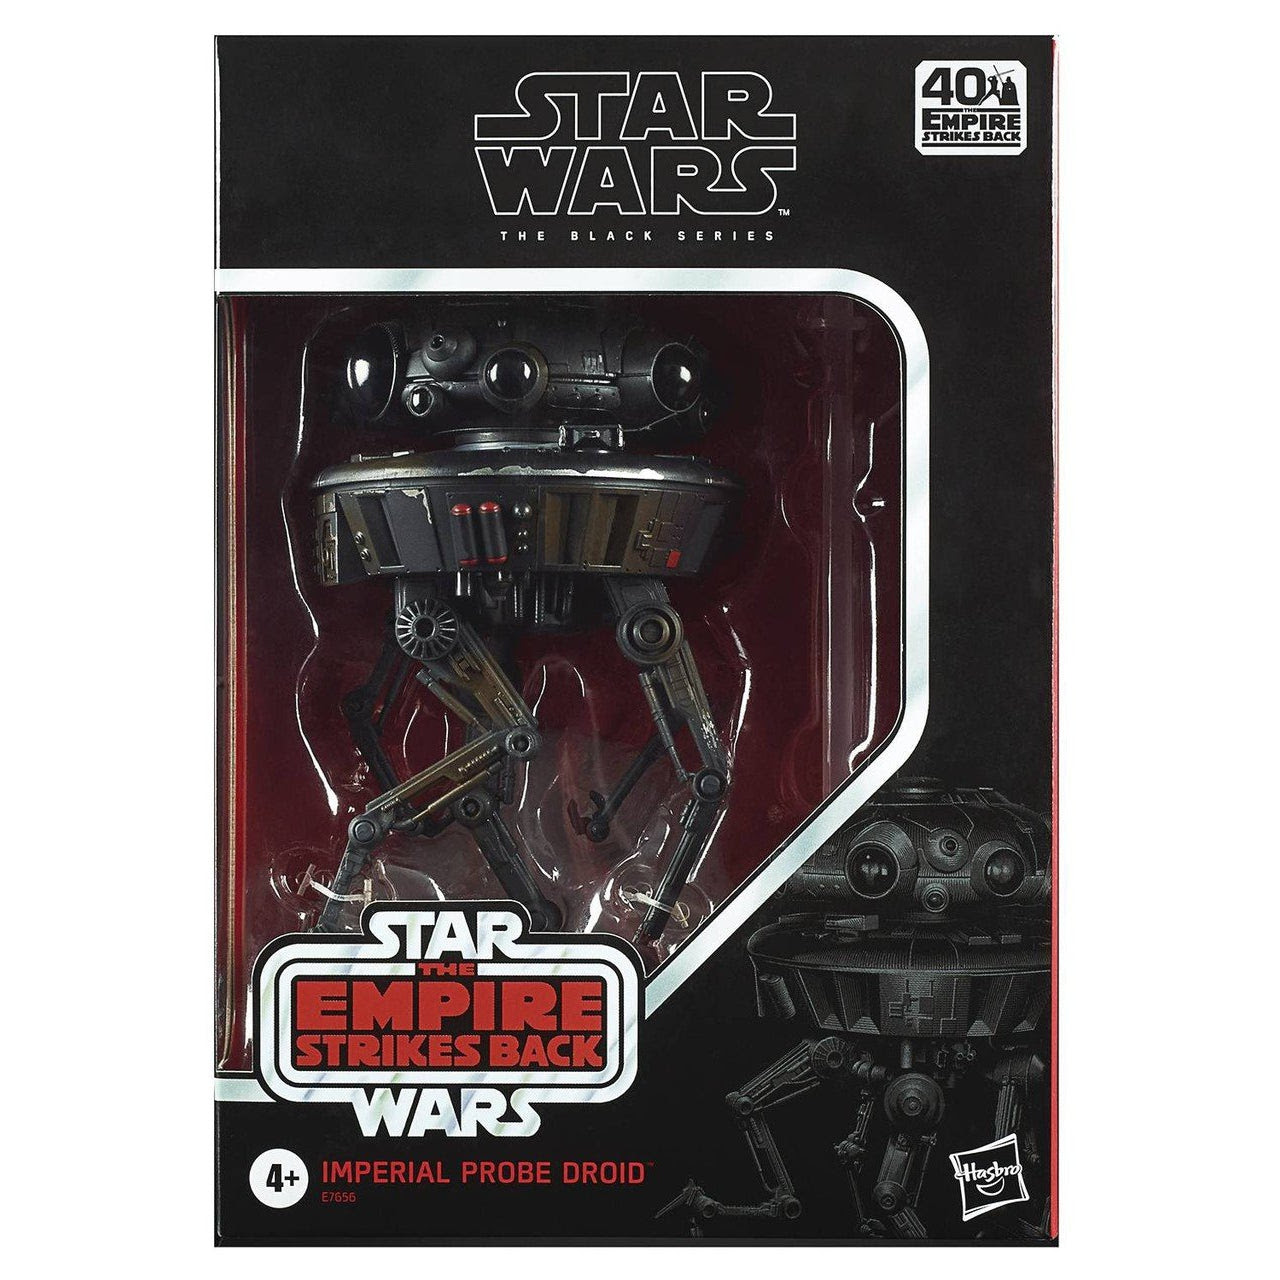 Image of Star Wars The Black Series 6" Scale Imperial Probe Droid